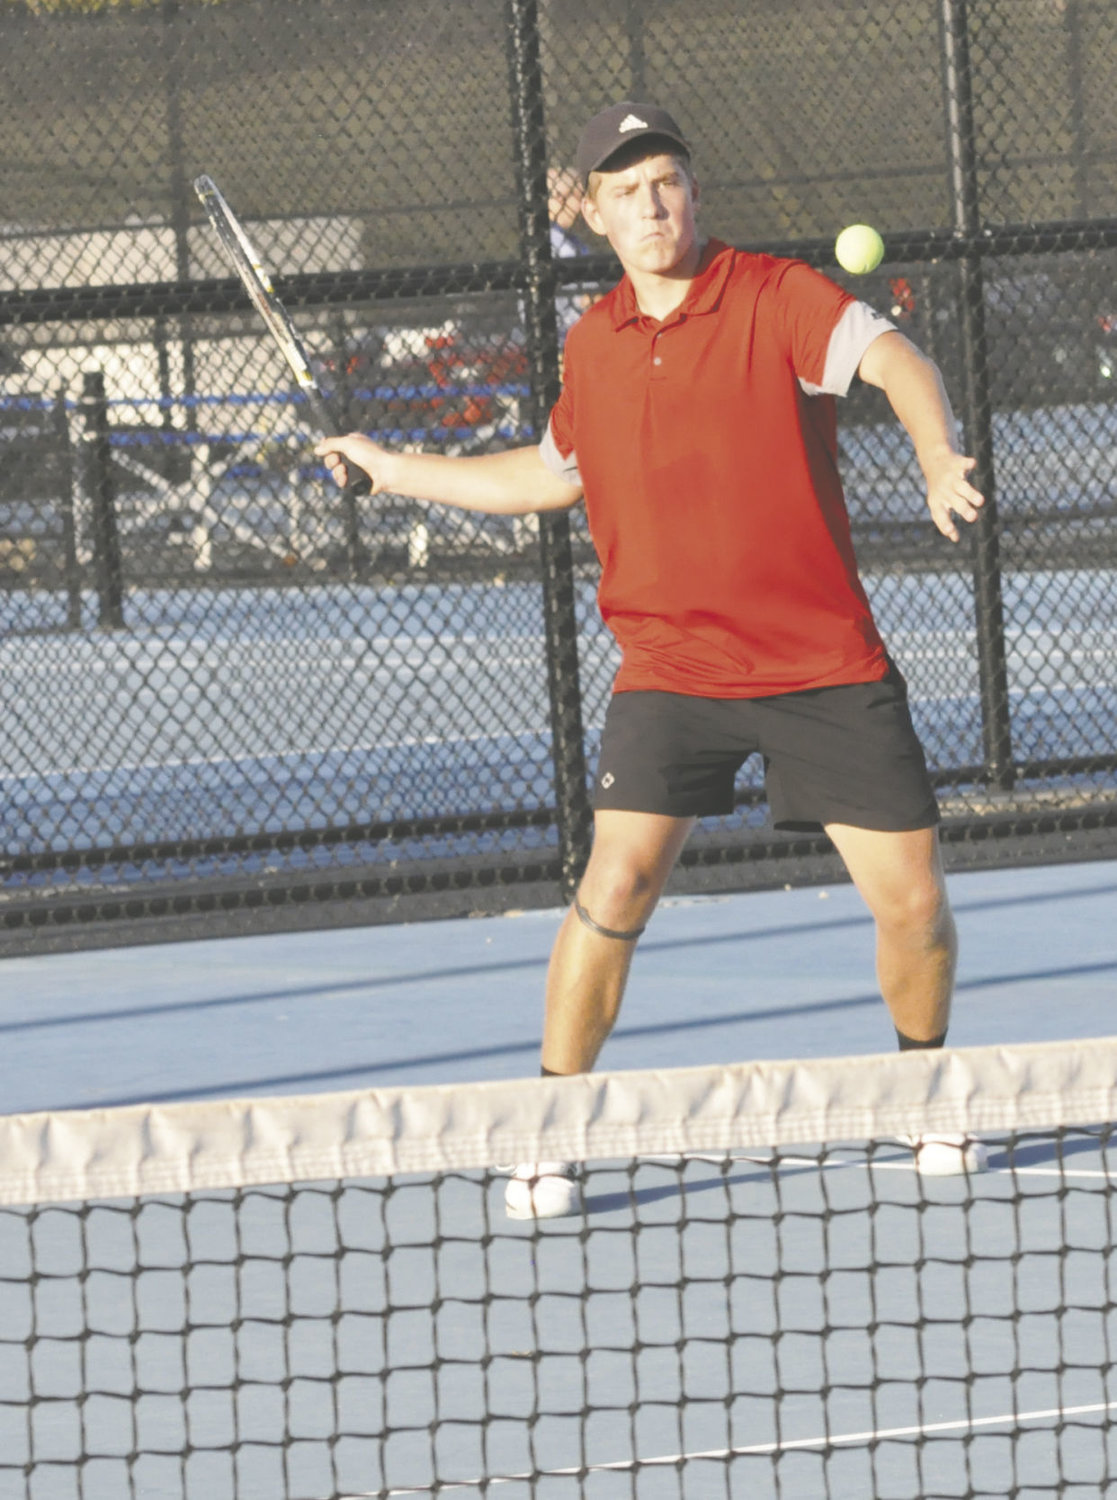 Conner McVay picked up a 3-set win in Southmont's 4-1 win over Northview at No. 3 singles.